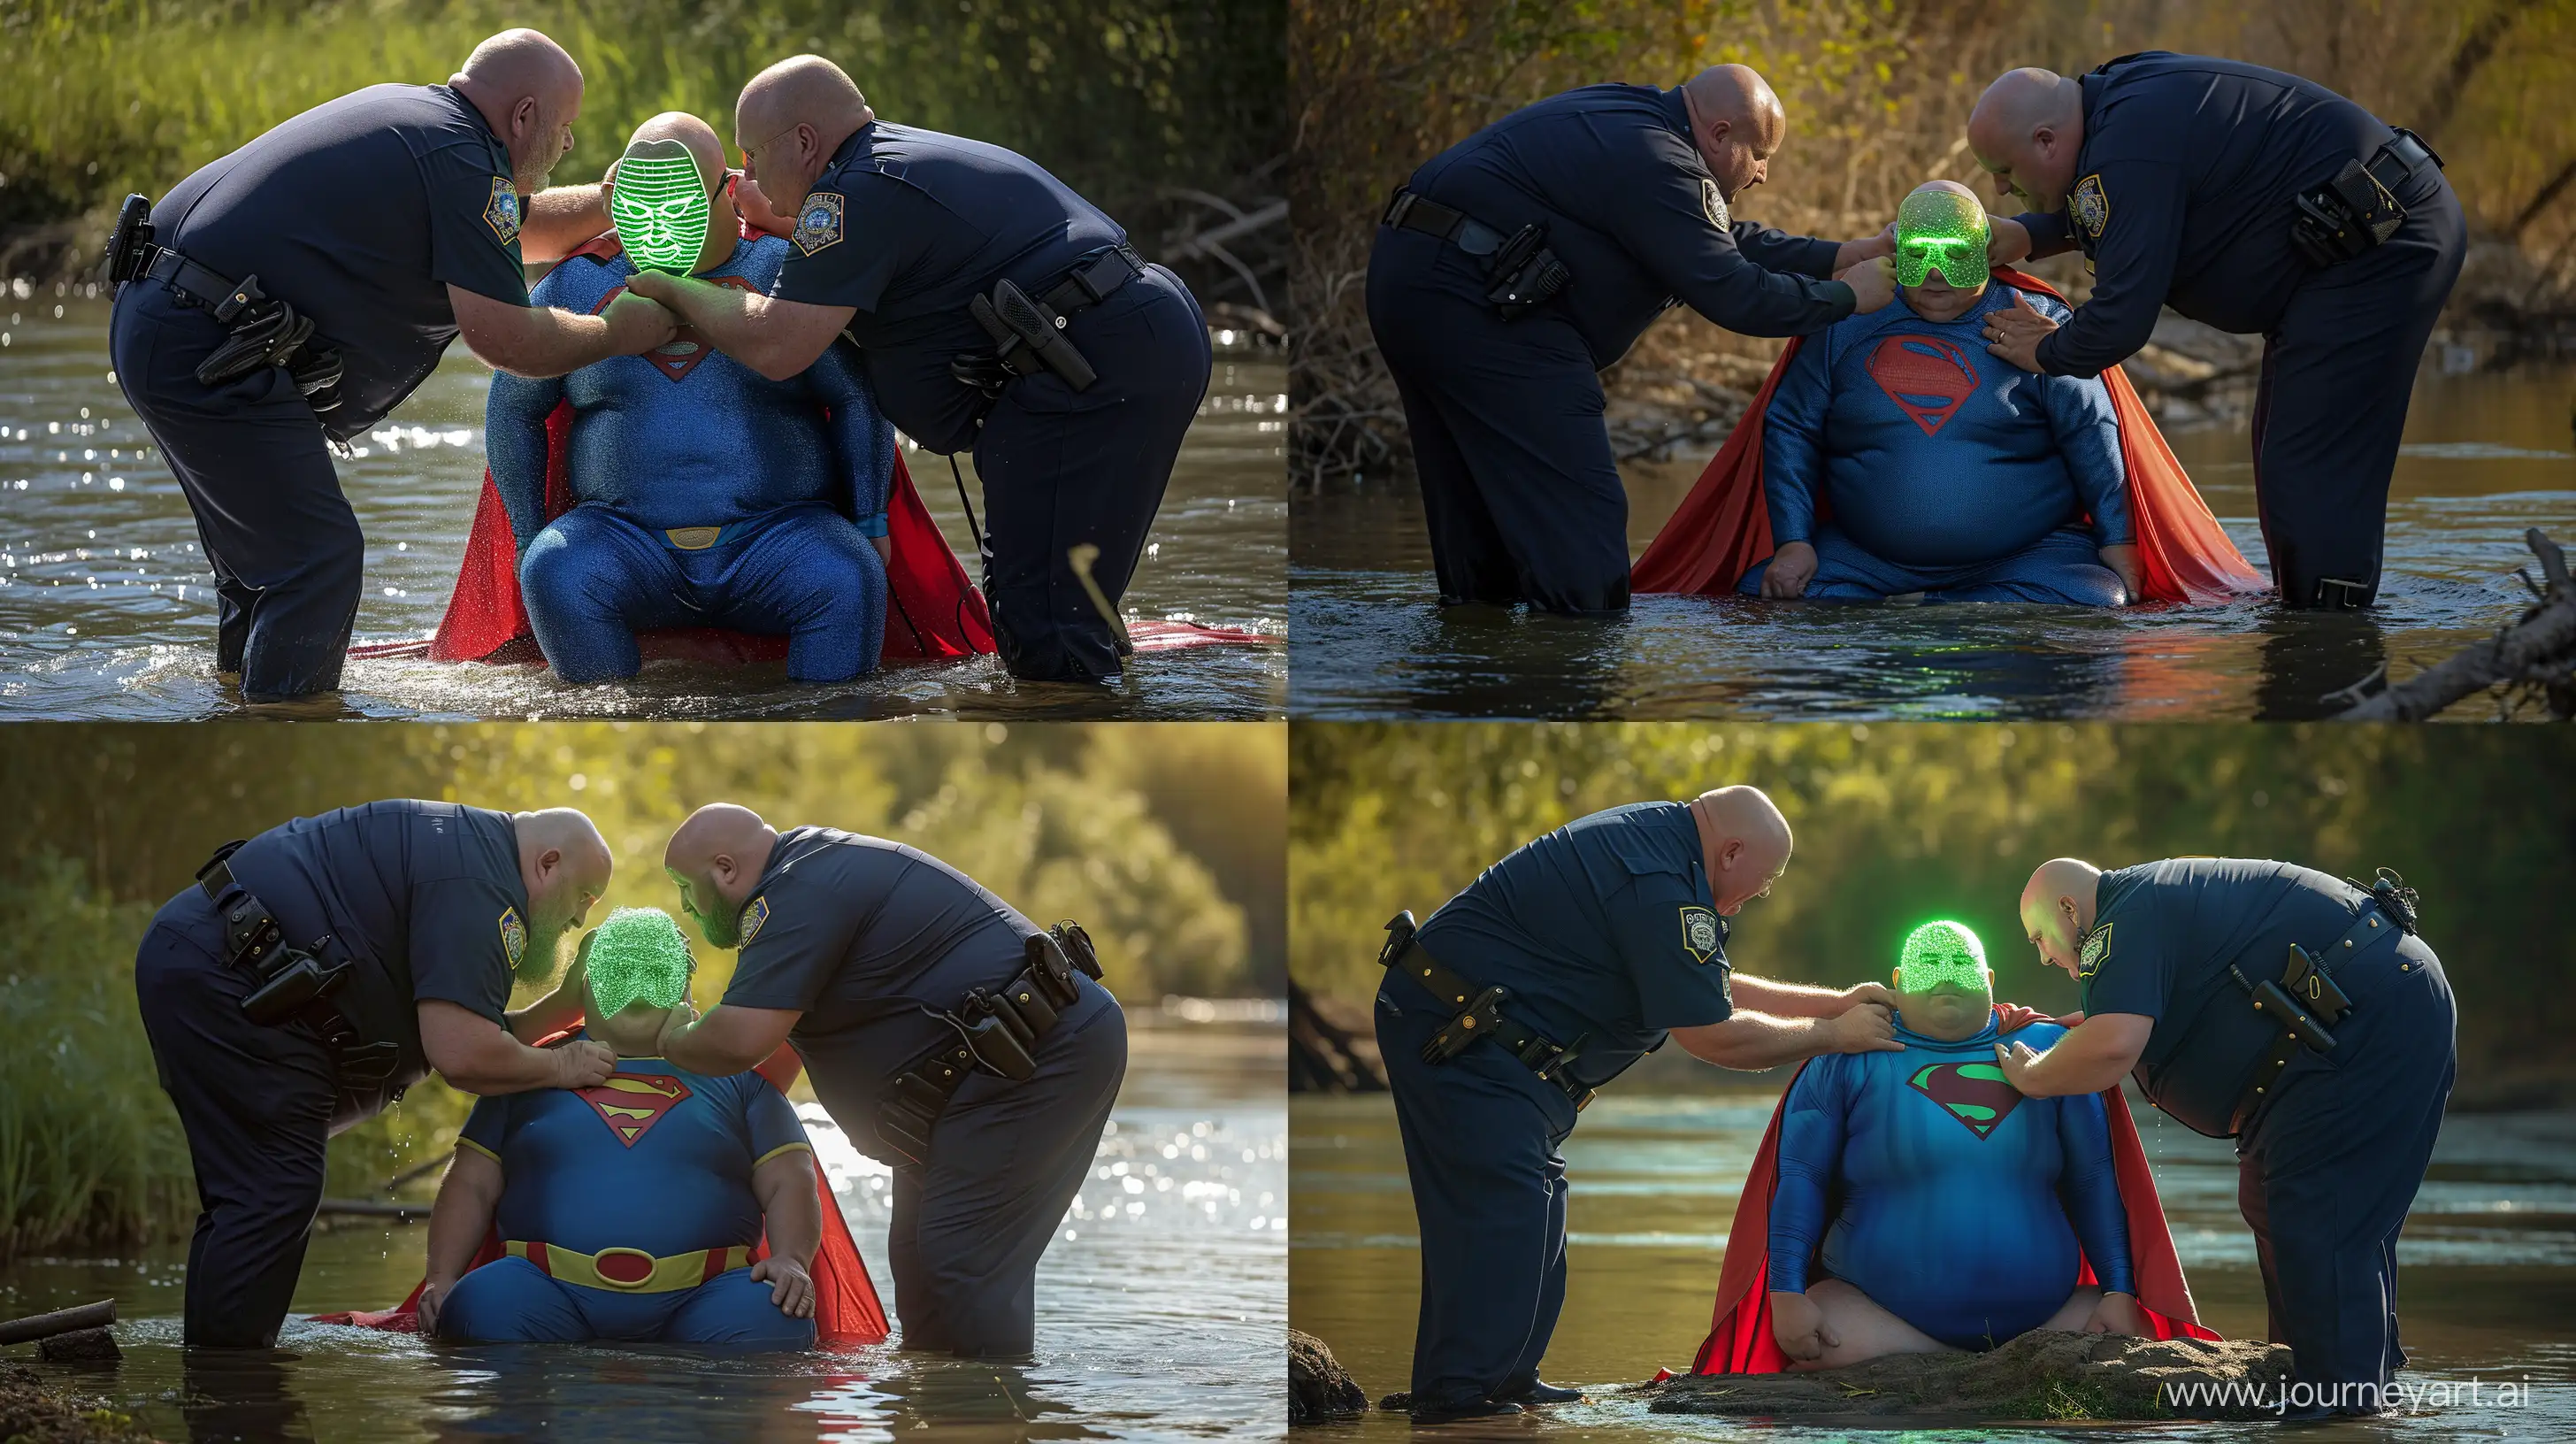 Elderly-Men-in-Silky-Police-Uniforms-and-Superman-Costume-by-the-River